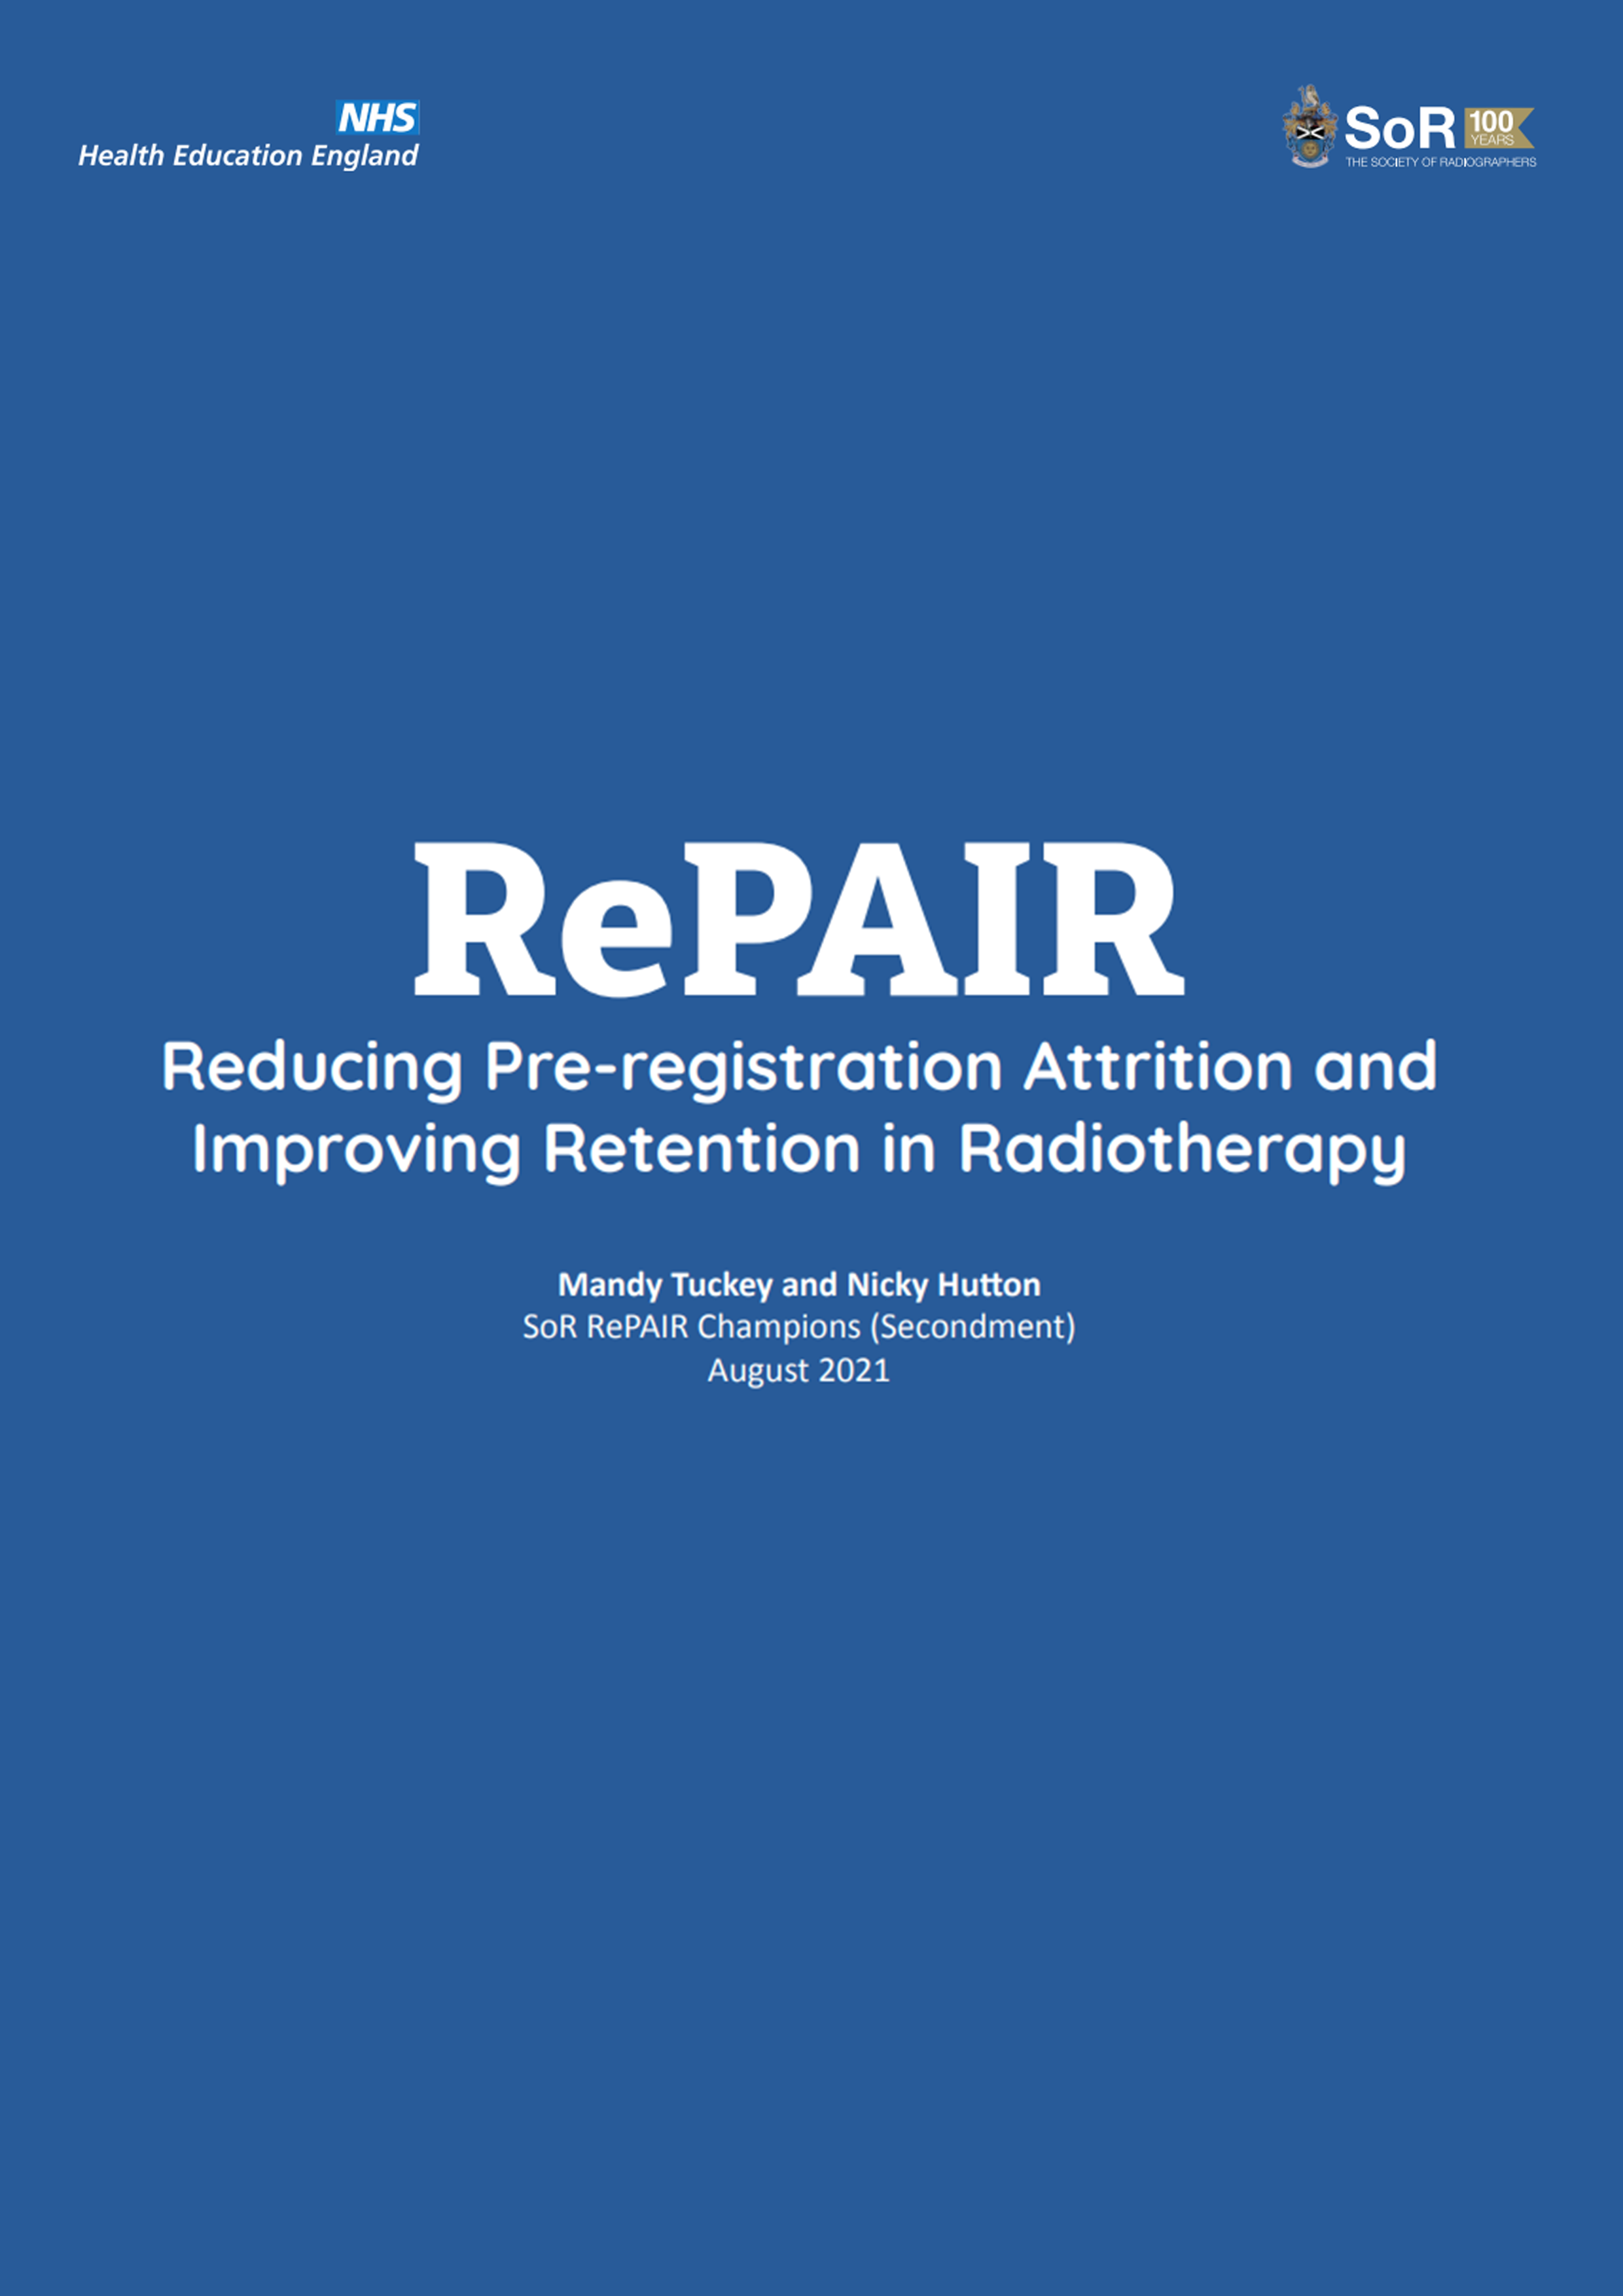 Reducing Pre-registration Attrition and Improving Retention in Radiotherapy